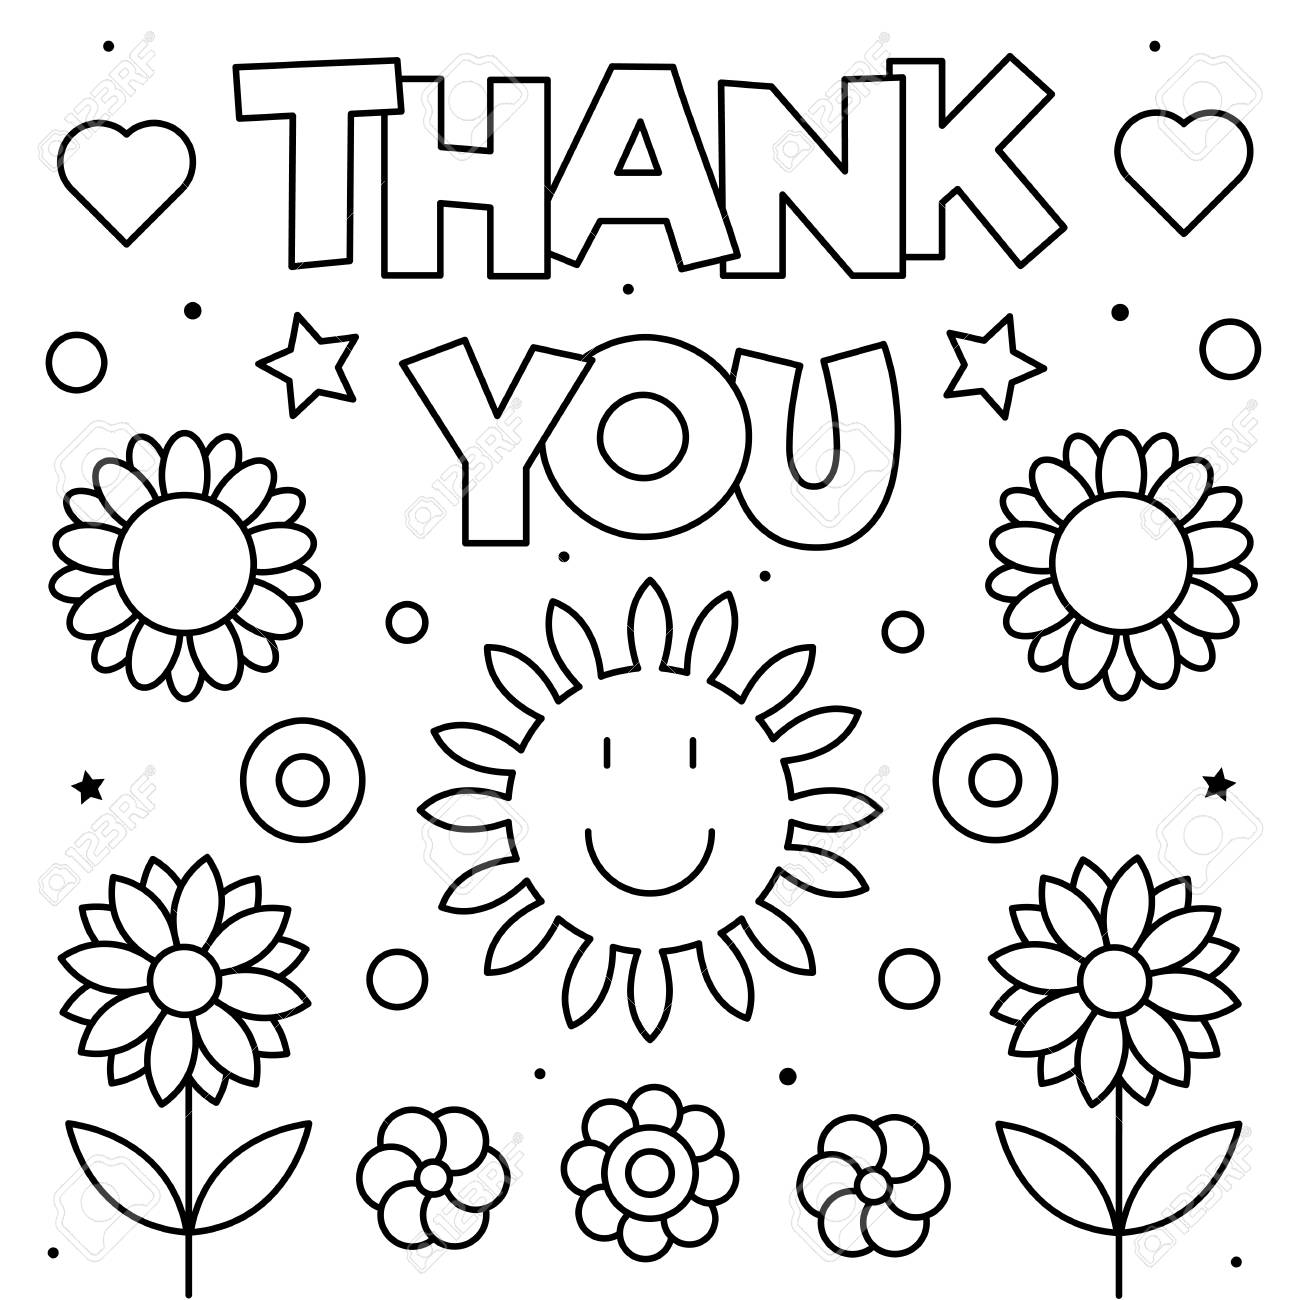 Flower Thank You Coloring Page Free Printable Coloring Pages For Kids